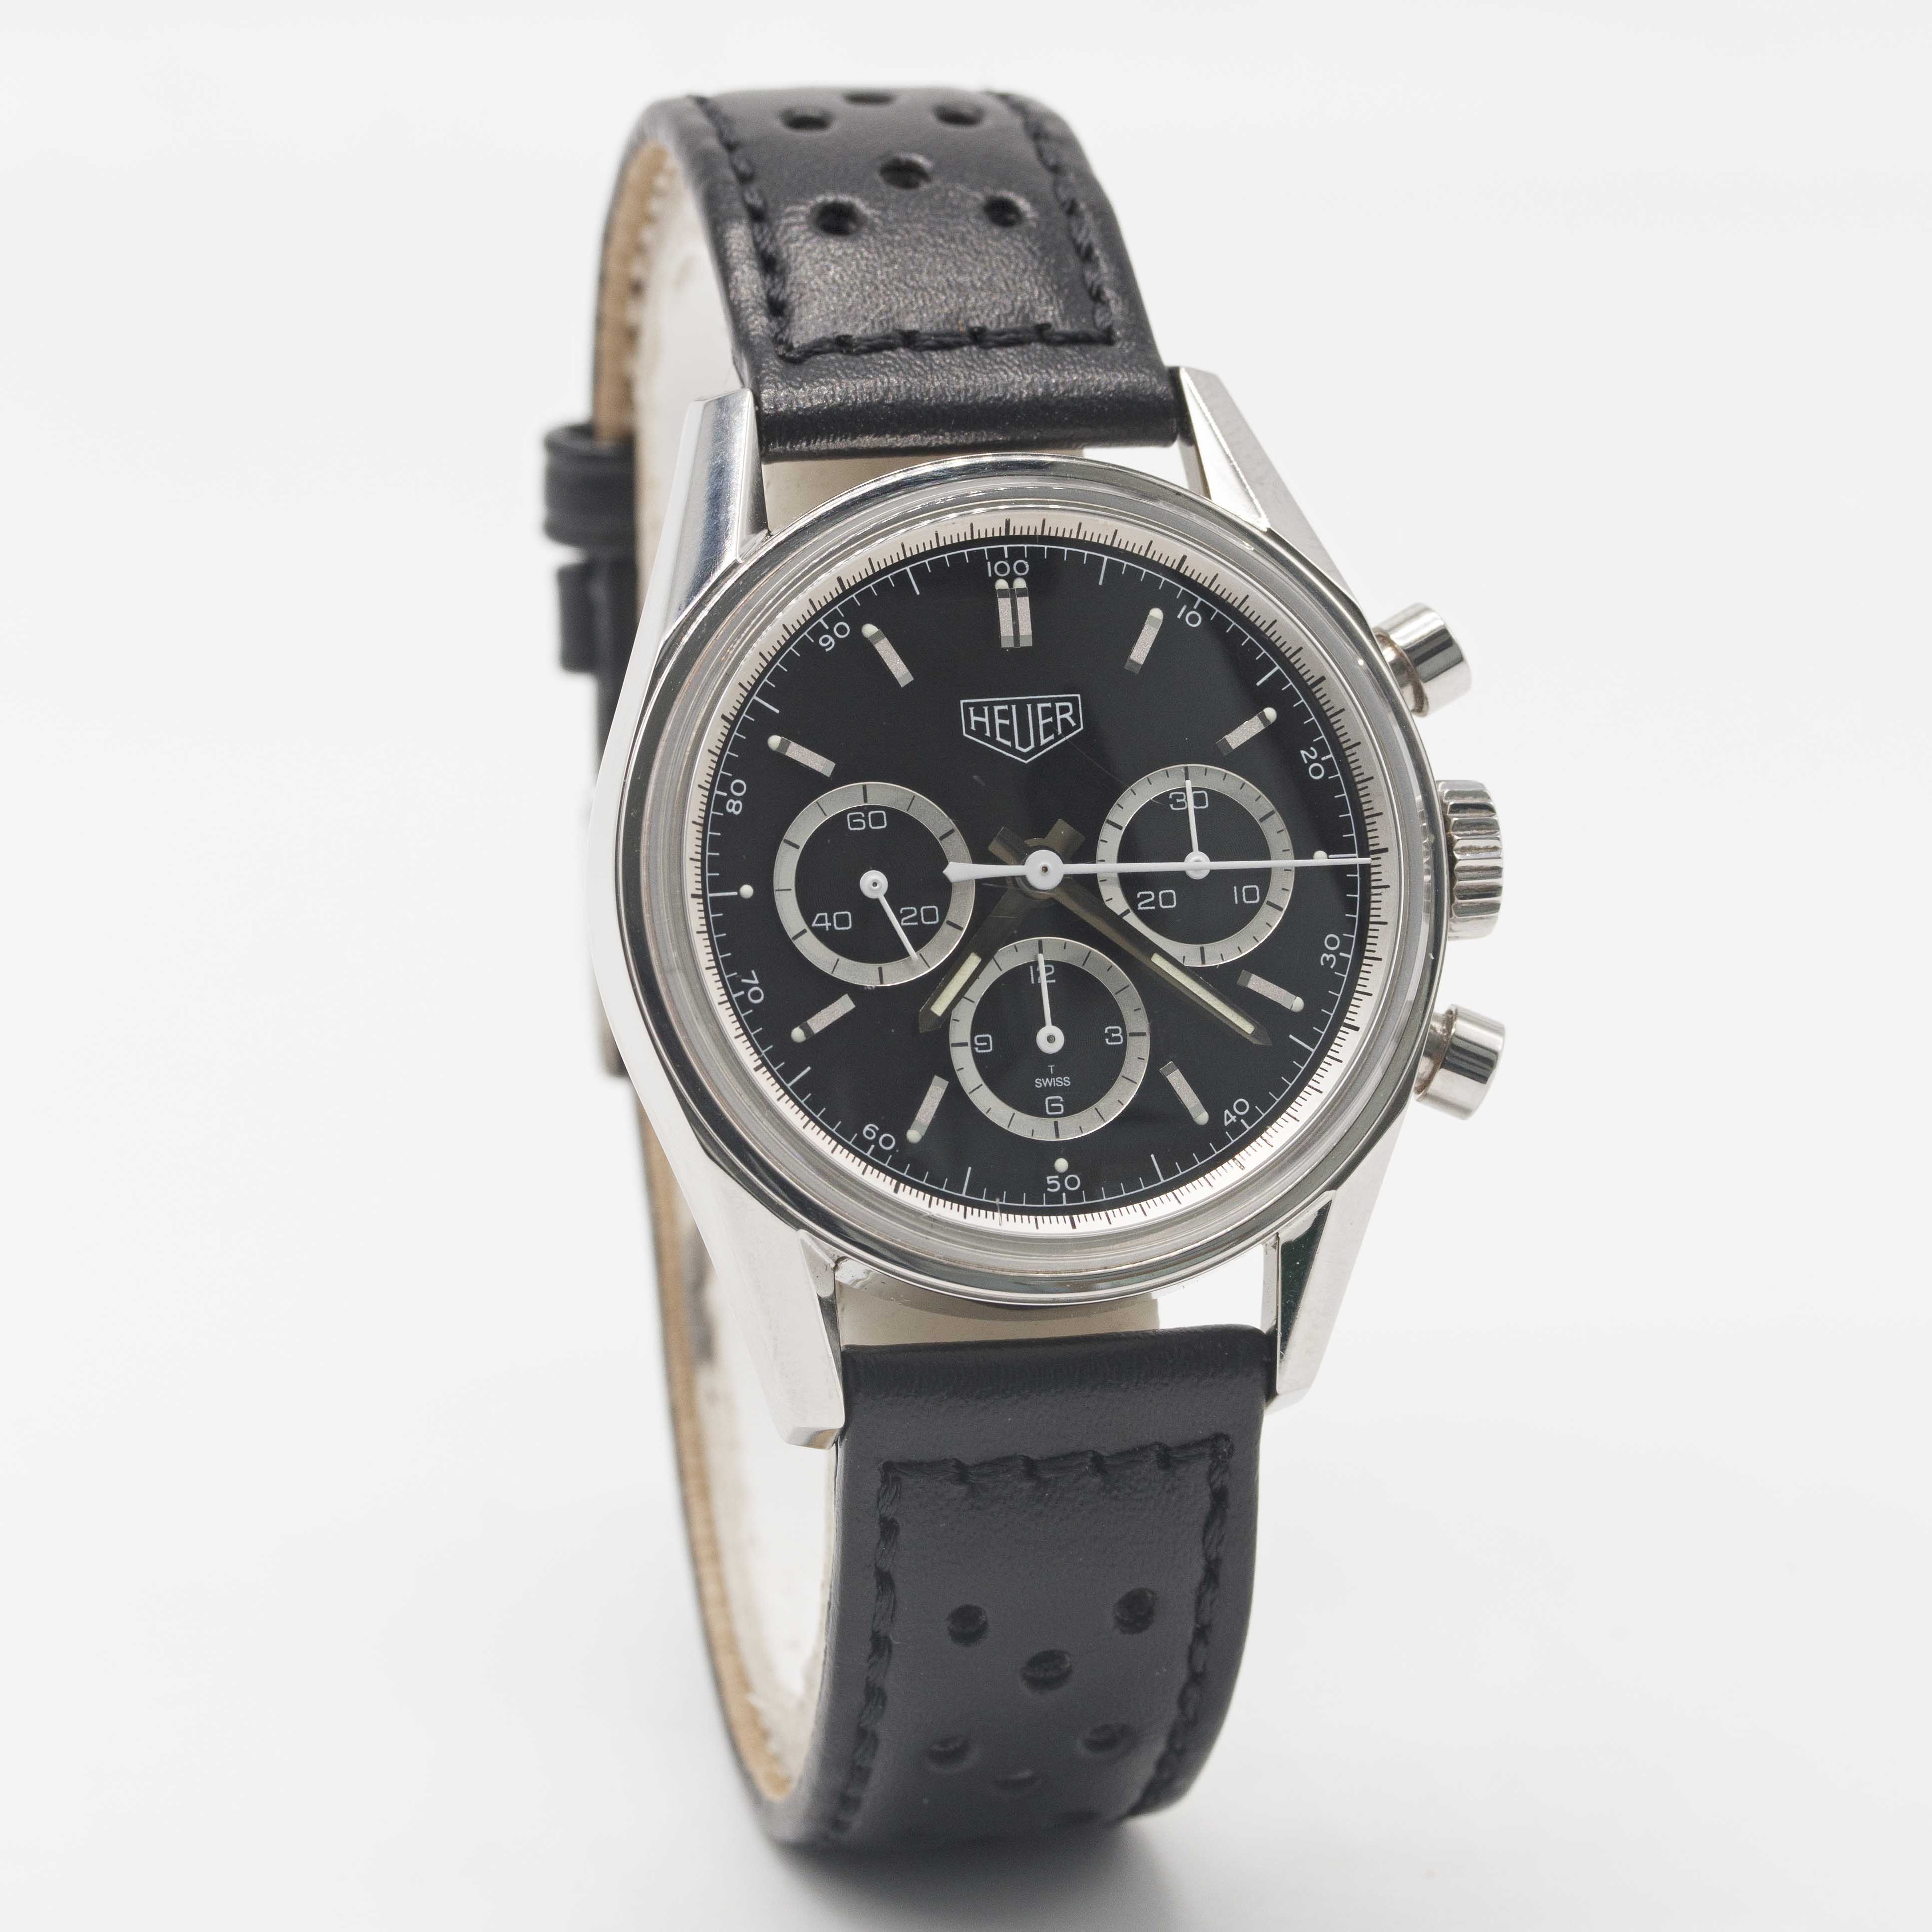 A GENTLEMAN'S STAINLESS STEEL HEUER CLASSIC CARRERA CHRONOGRAPH WRIST WATCH DATED 2000, REF. - Image 4 of 7